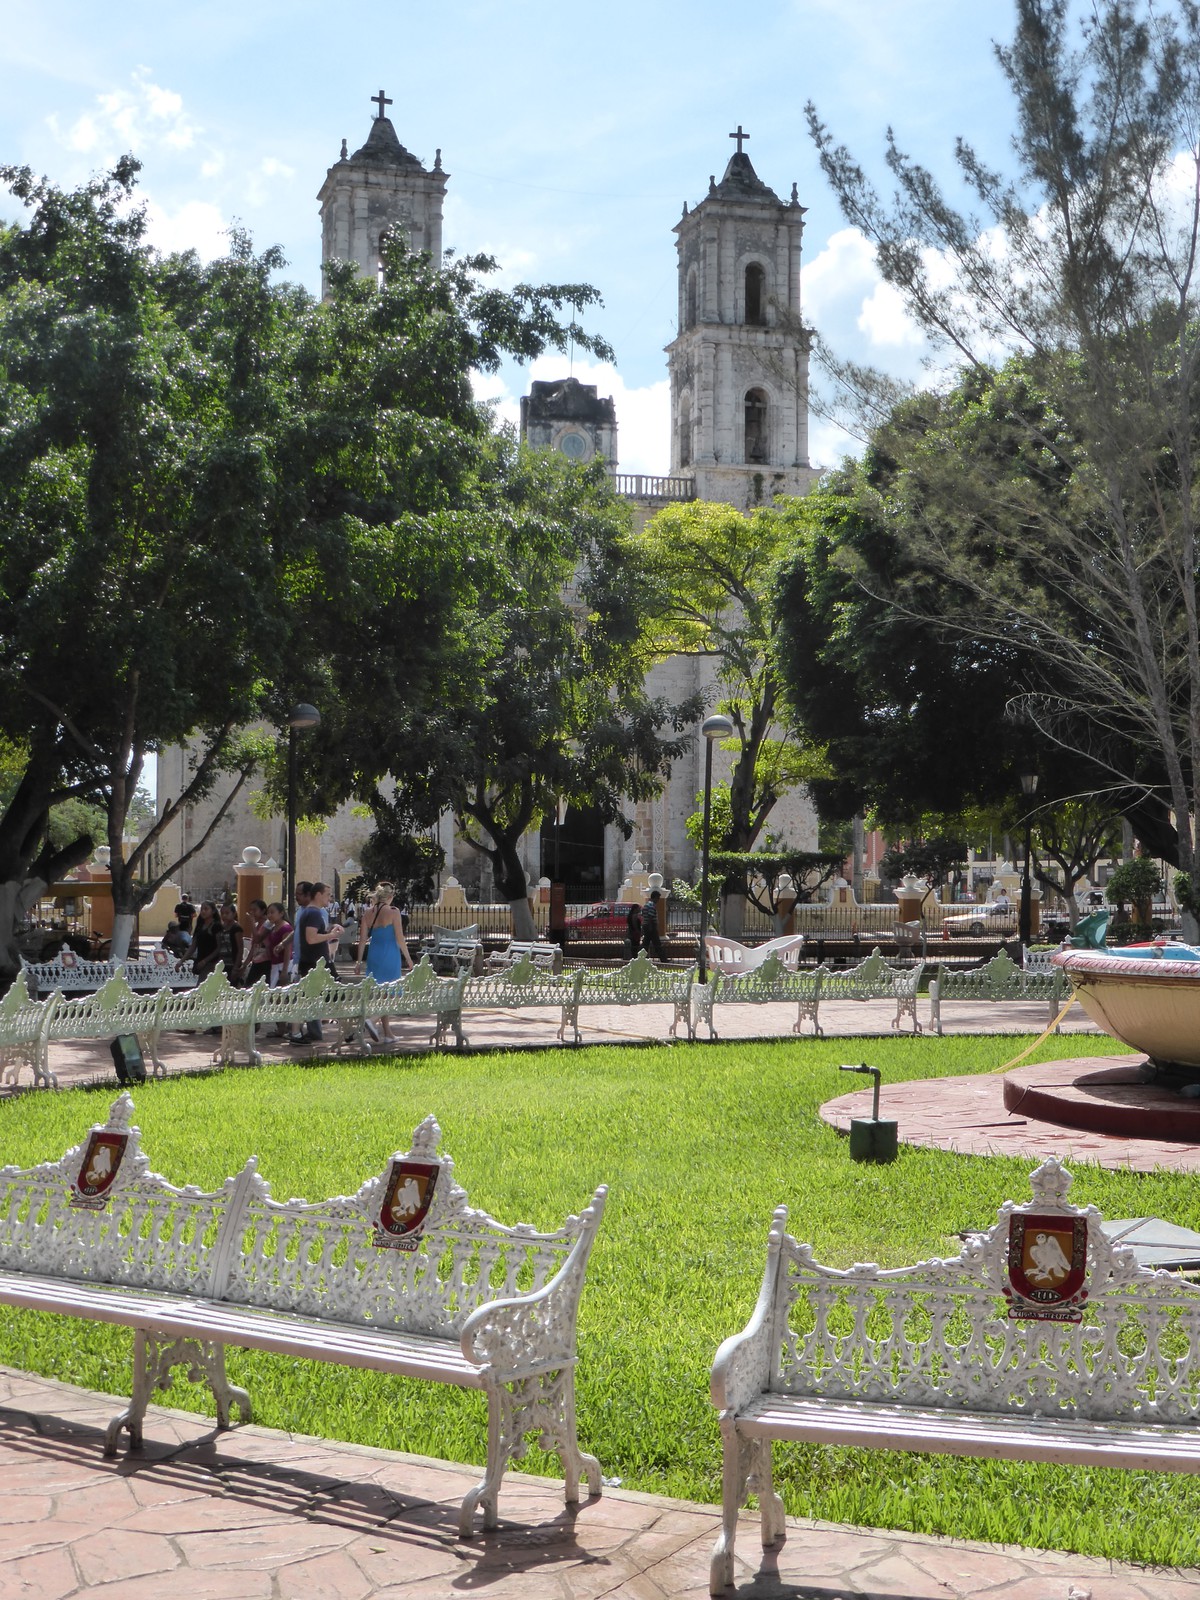 Parque Francisco Cantón Rosado with the towers of the Cathedral de San Gervasio in the background